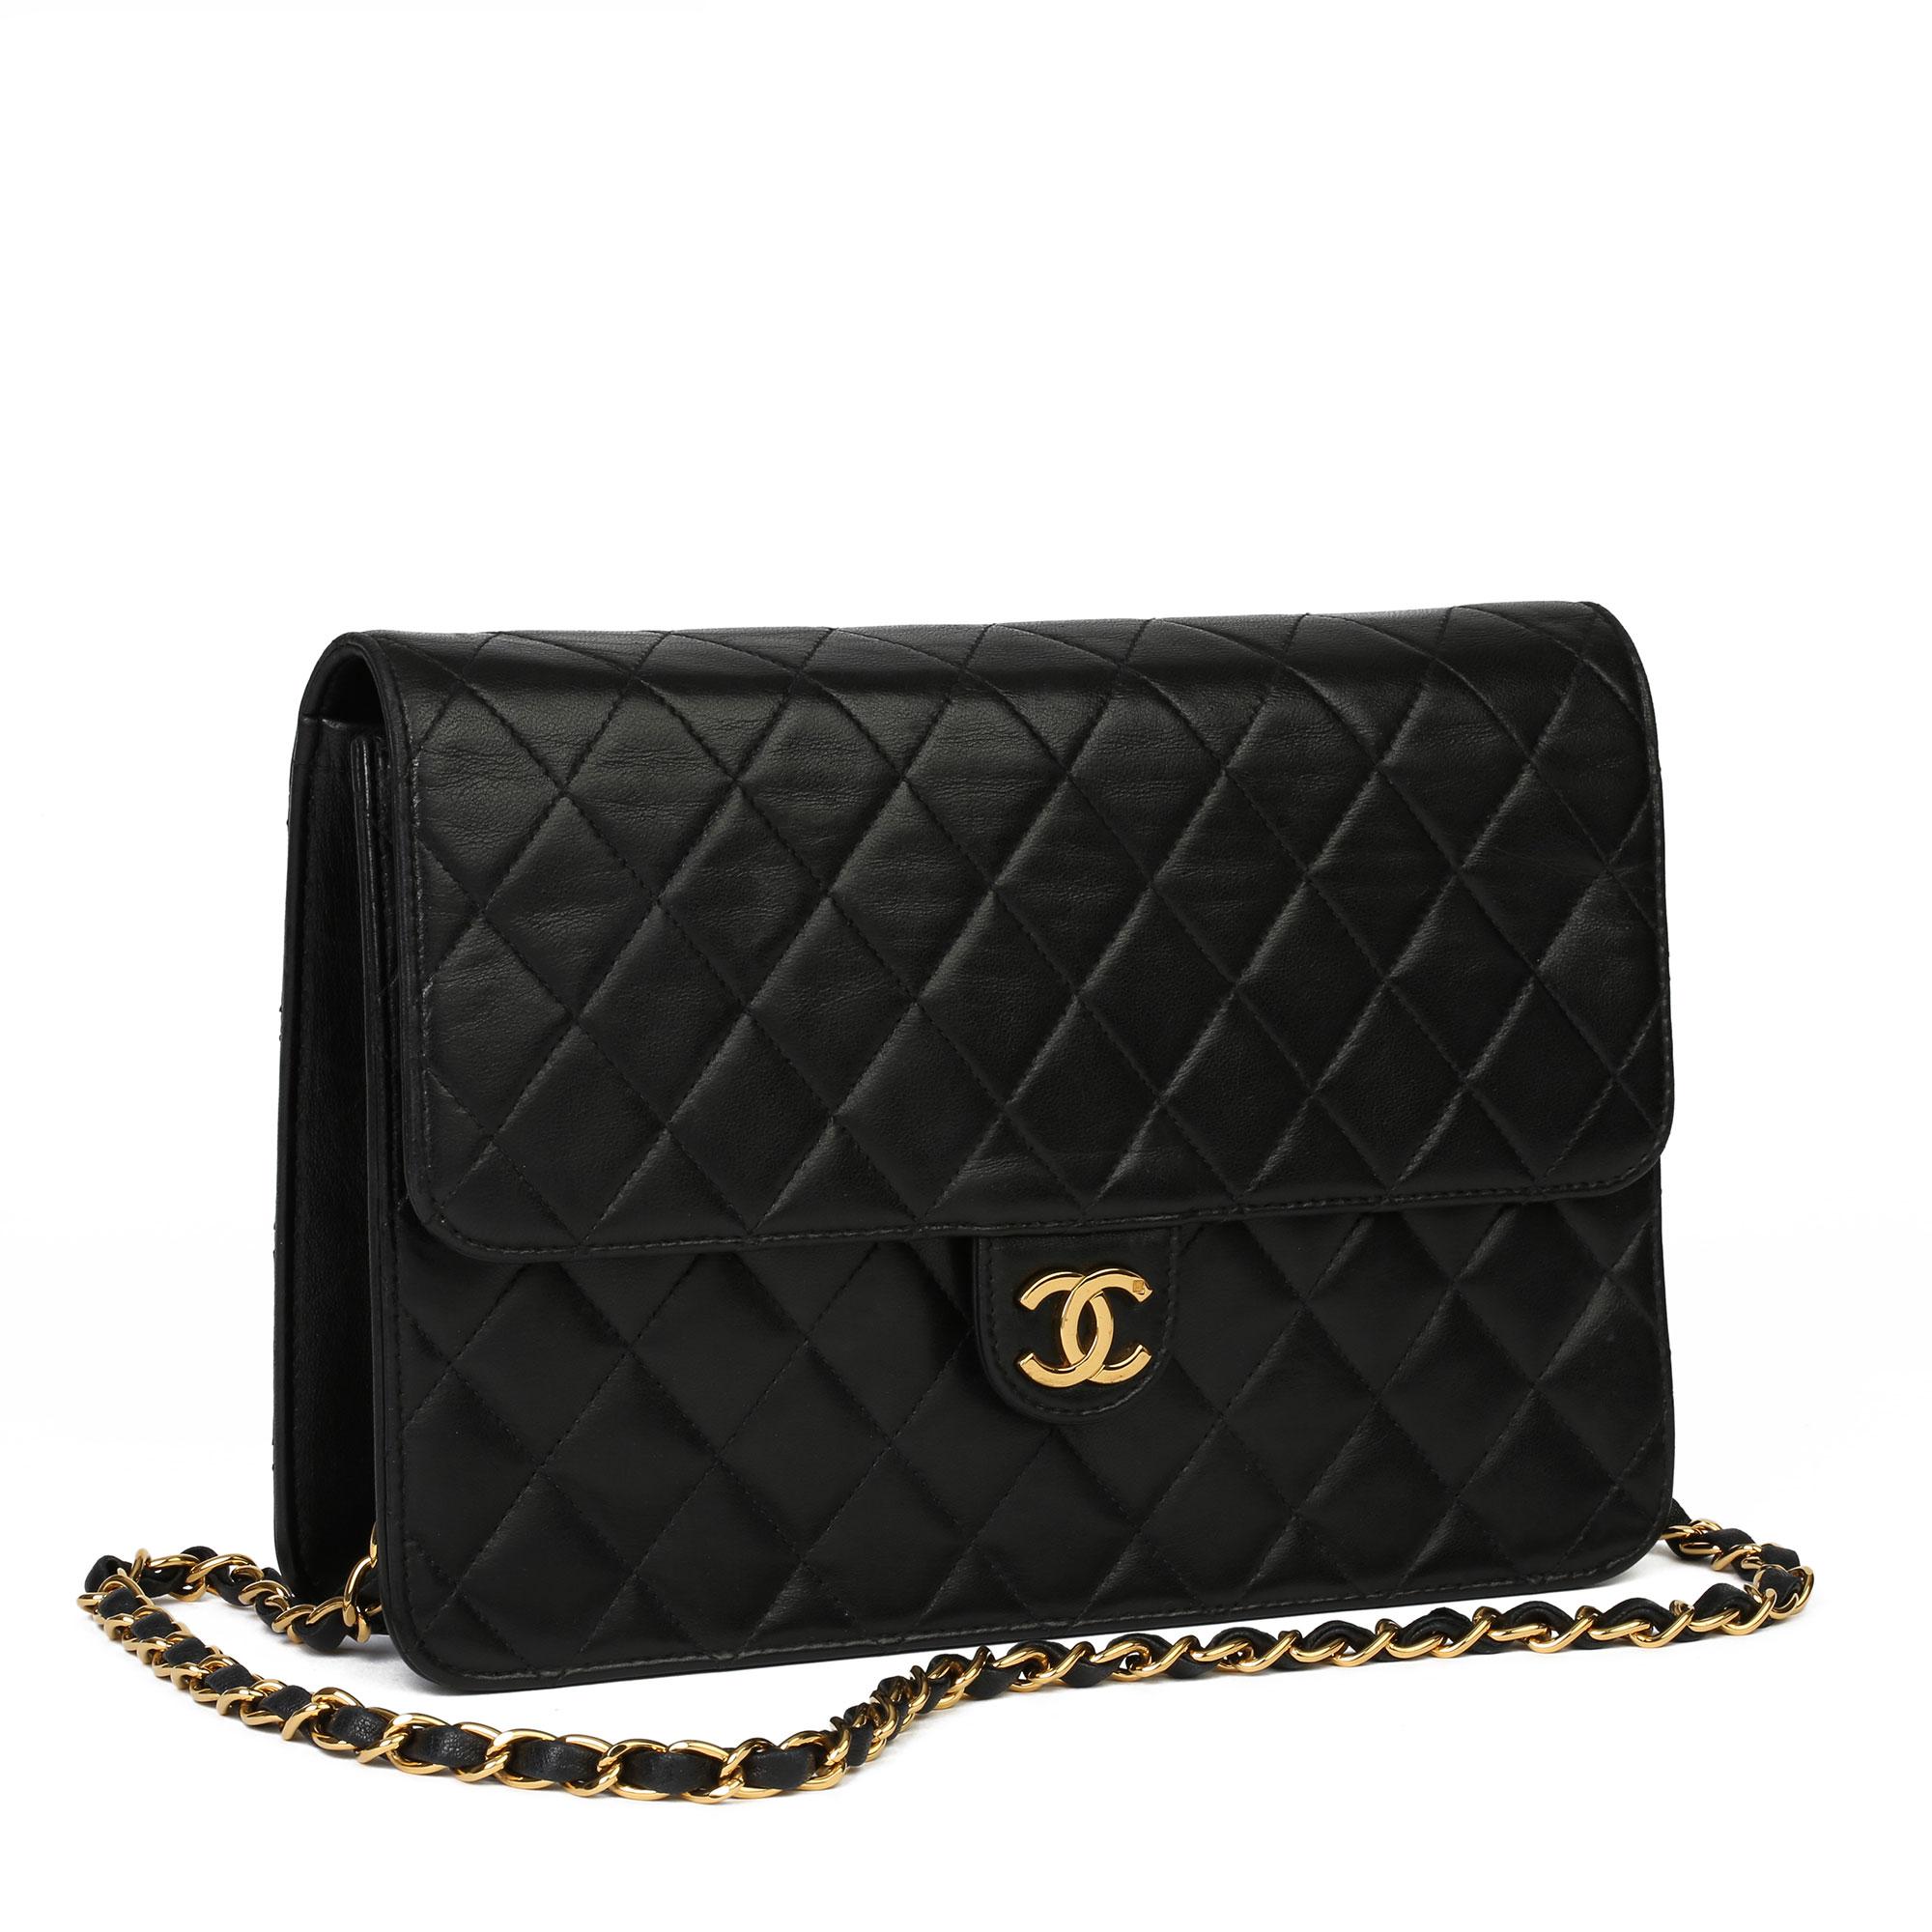 CHANEL
Black Quilted Lambskin Vintage Medium Classic Single Flap Bag 

Xupes Reference: HB3907
Serial Number: 6043495
Age (Circa): 2000
Accompanied By: Care Booklet
Authenticity Details: Serial Sticker (Made in France) 
Gender: Ladies
Type: